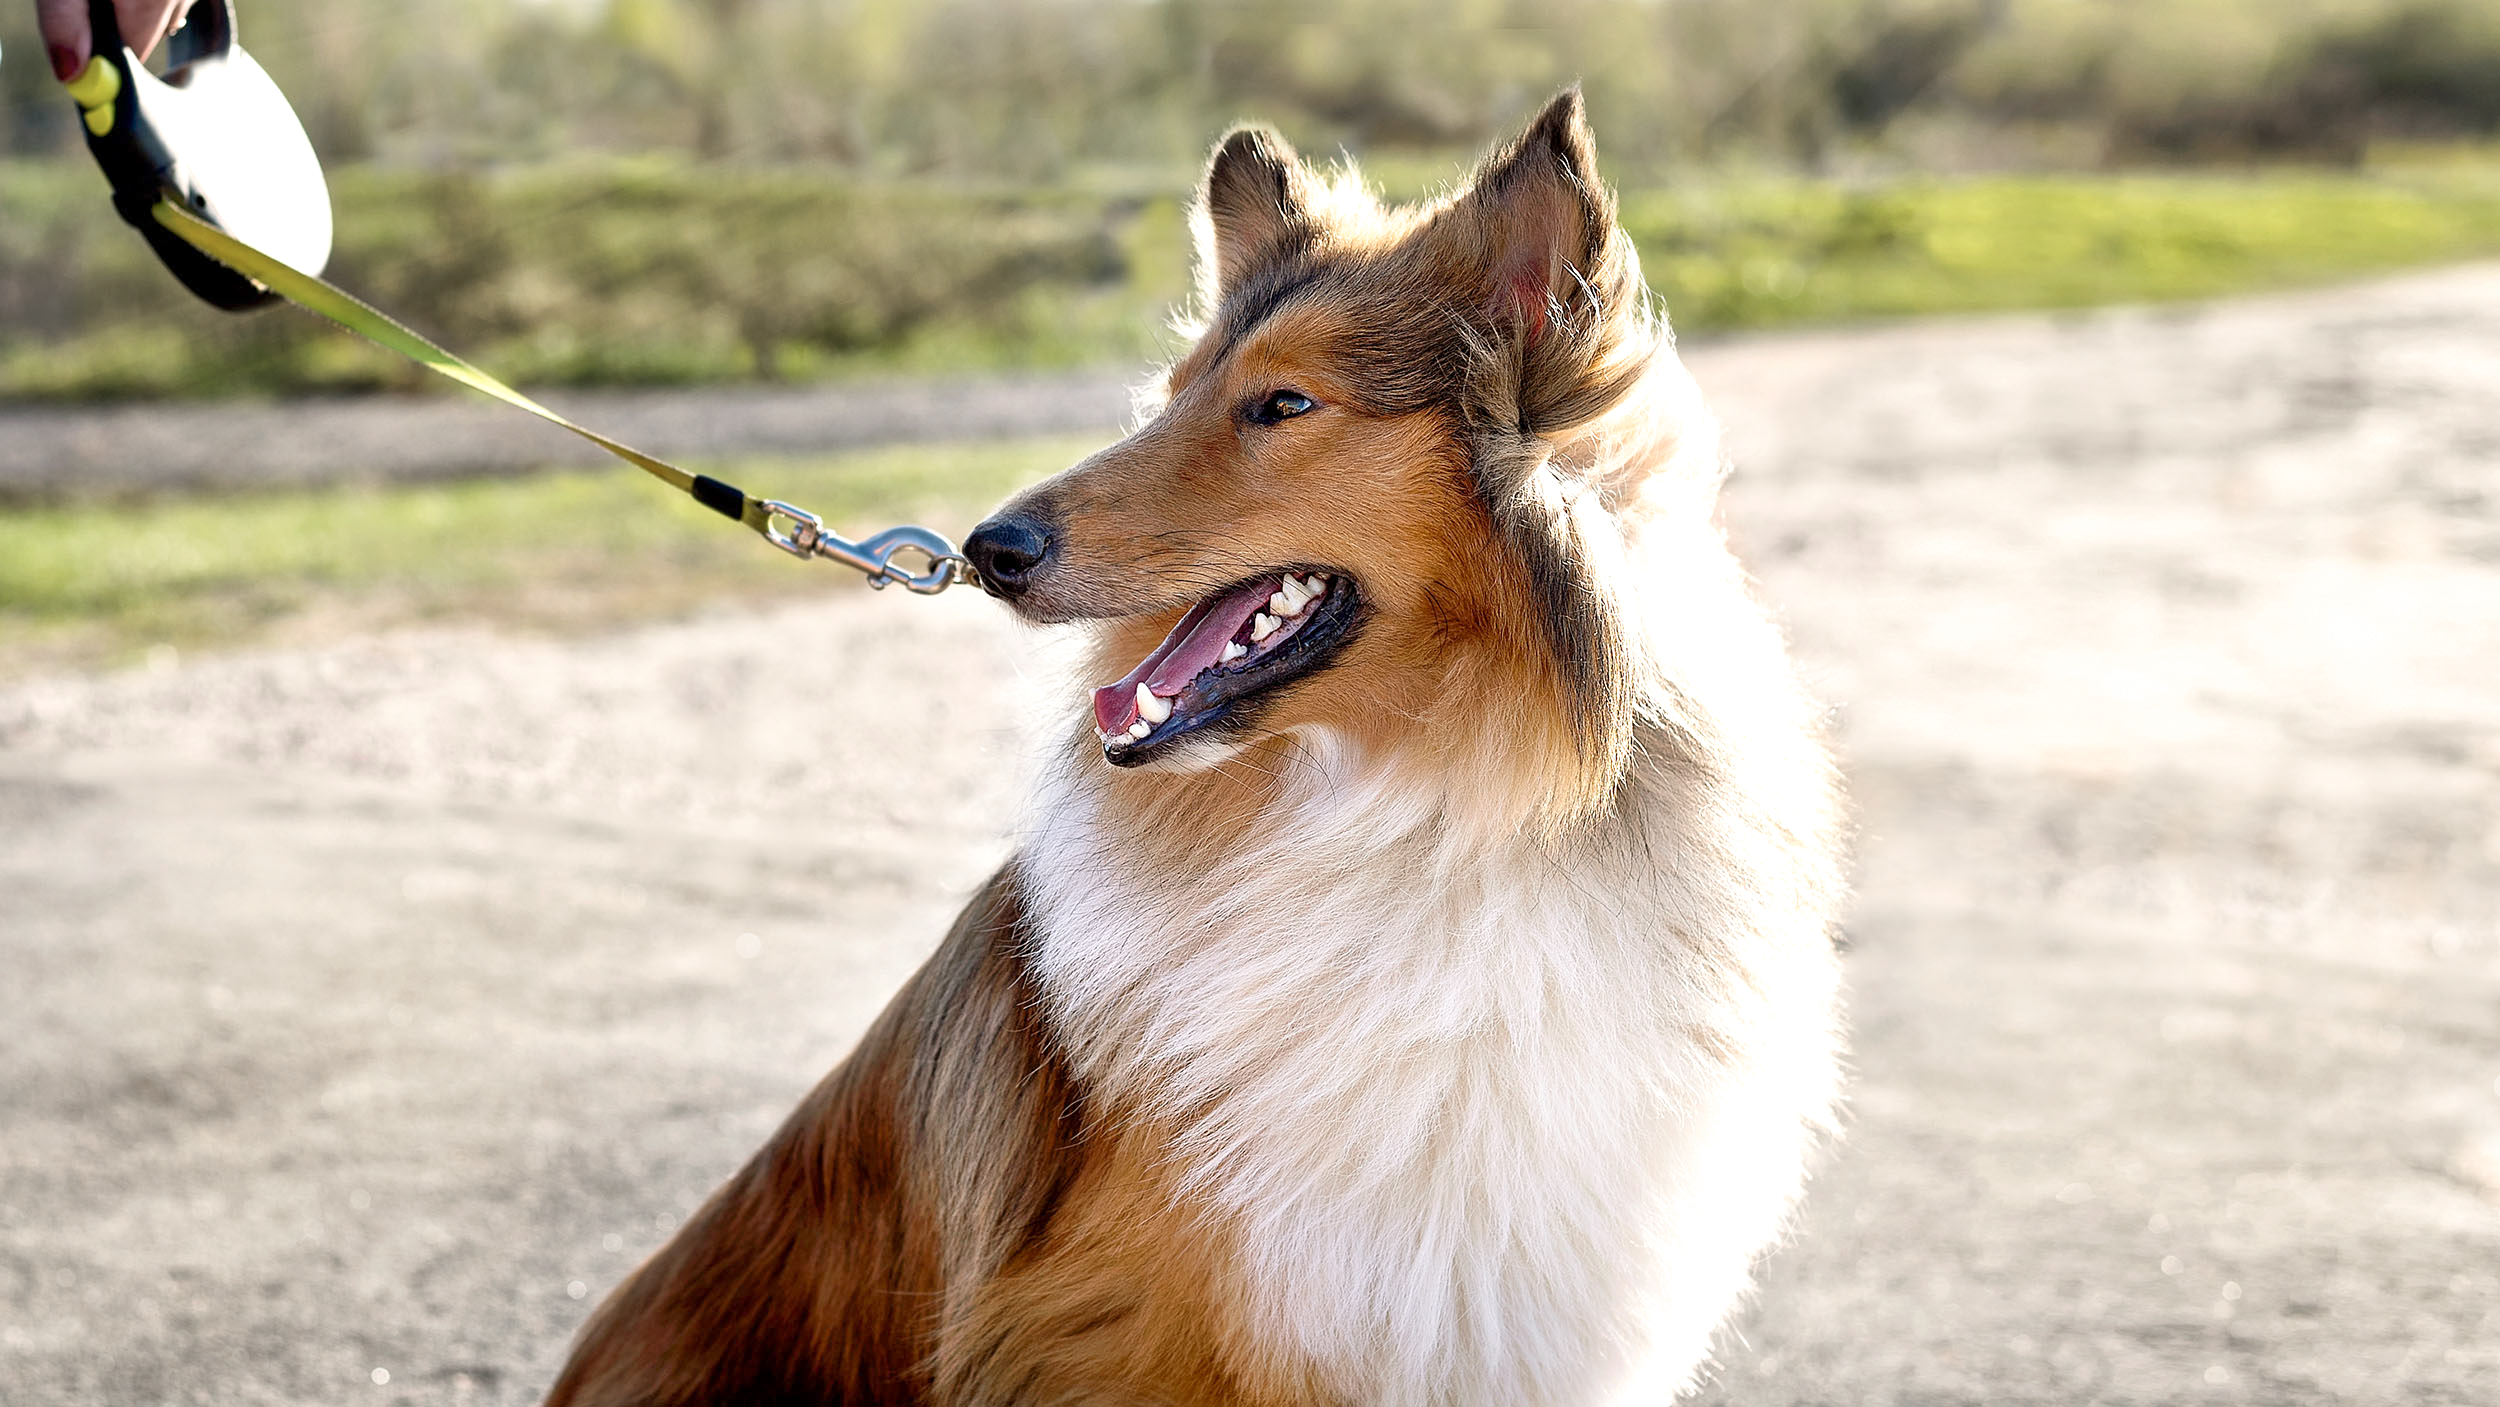 Adult Rough Collie sitting down outdoors on a footpath.